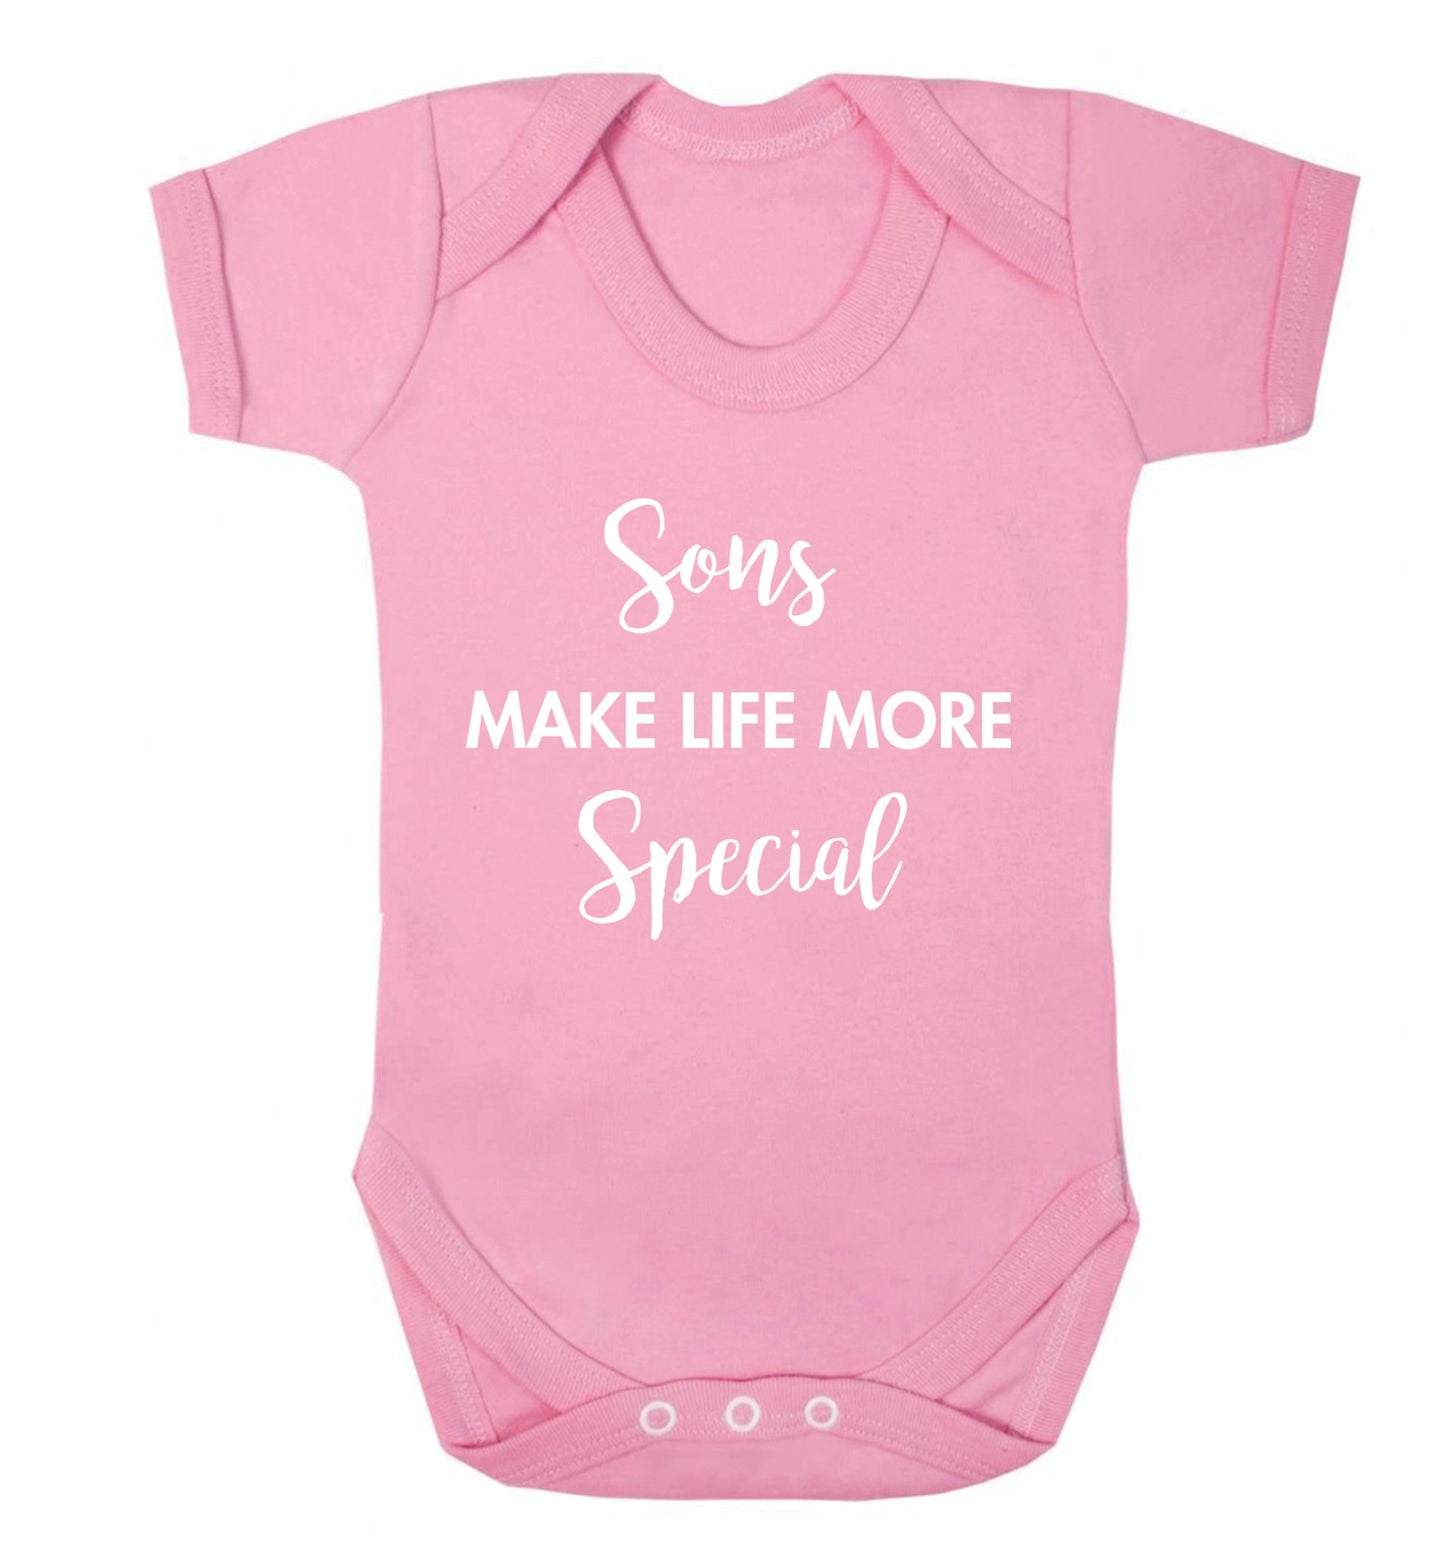 Sons make life more special Baby Vest pale pink 18-24 months